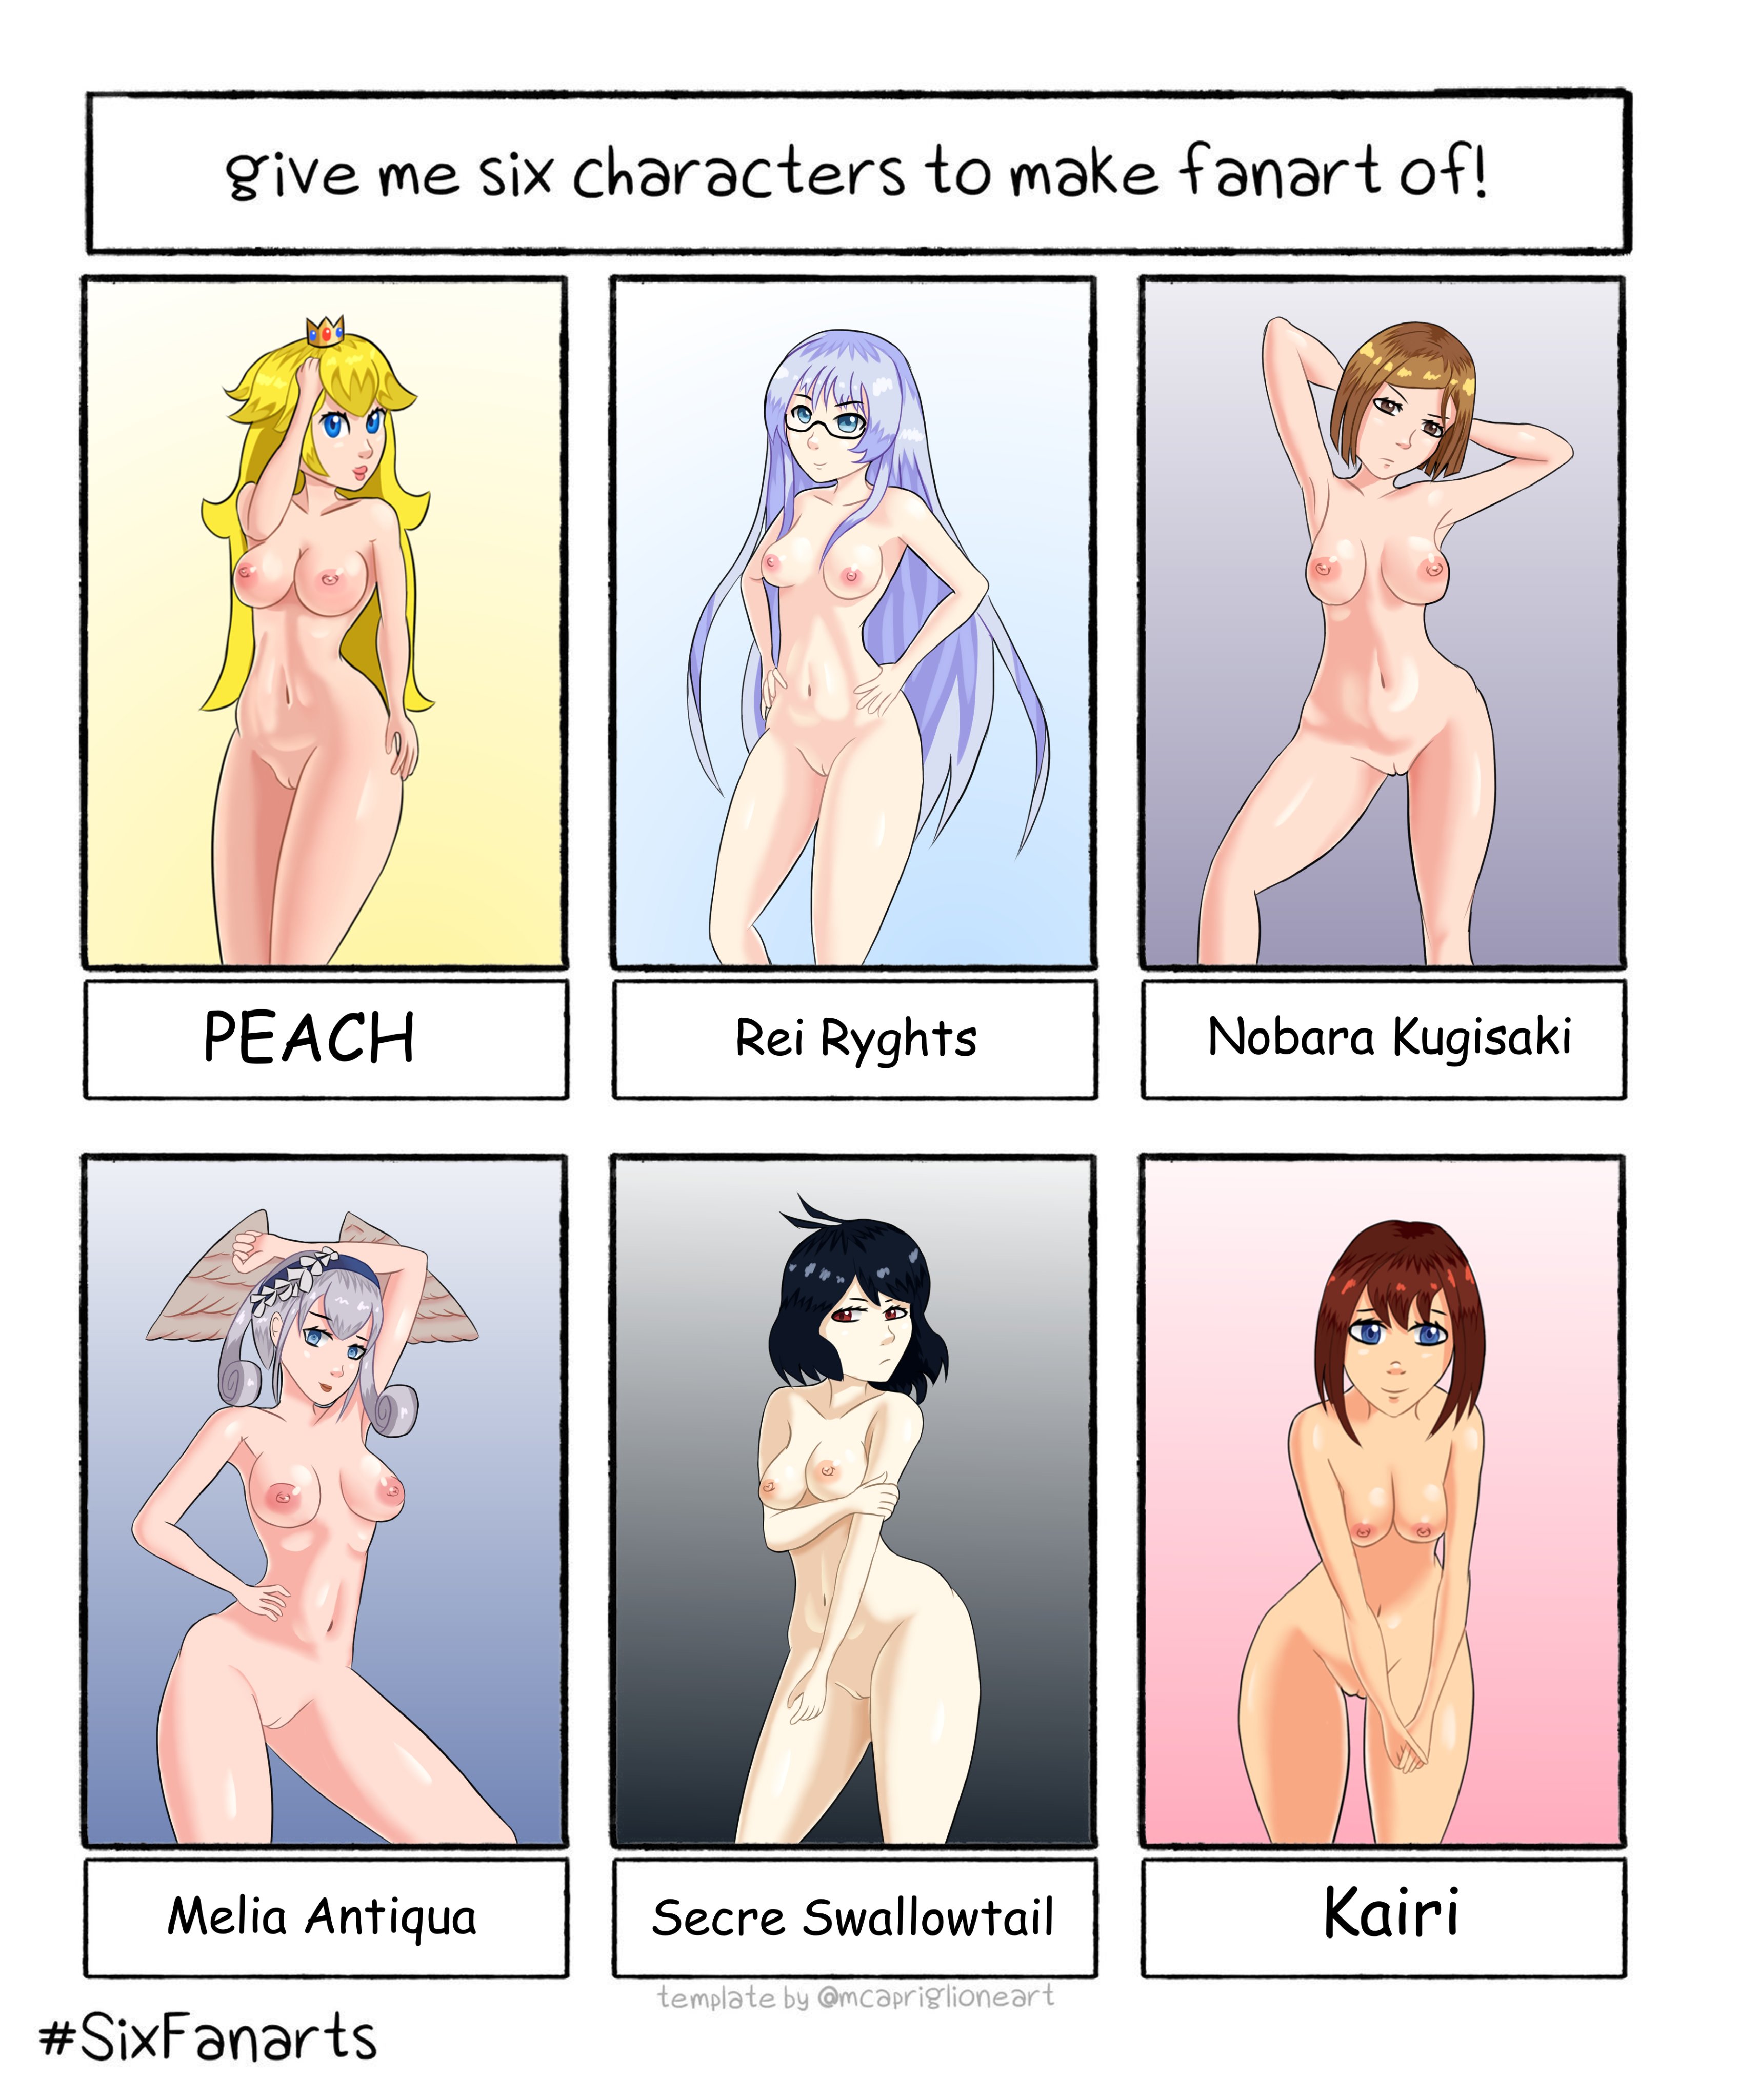 Rule If It Exists There Is Porn Of It Kairi Melia Antiqua Princess Peach Rei Ryghts